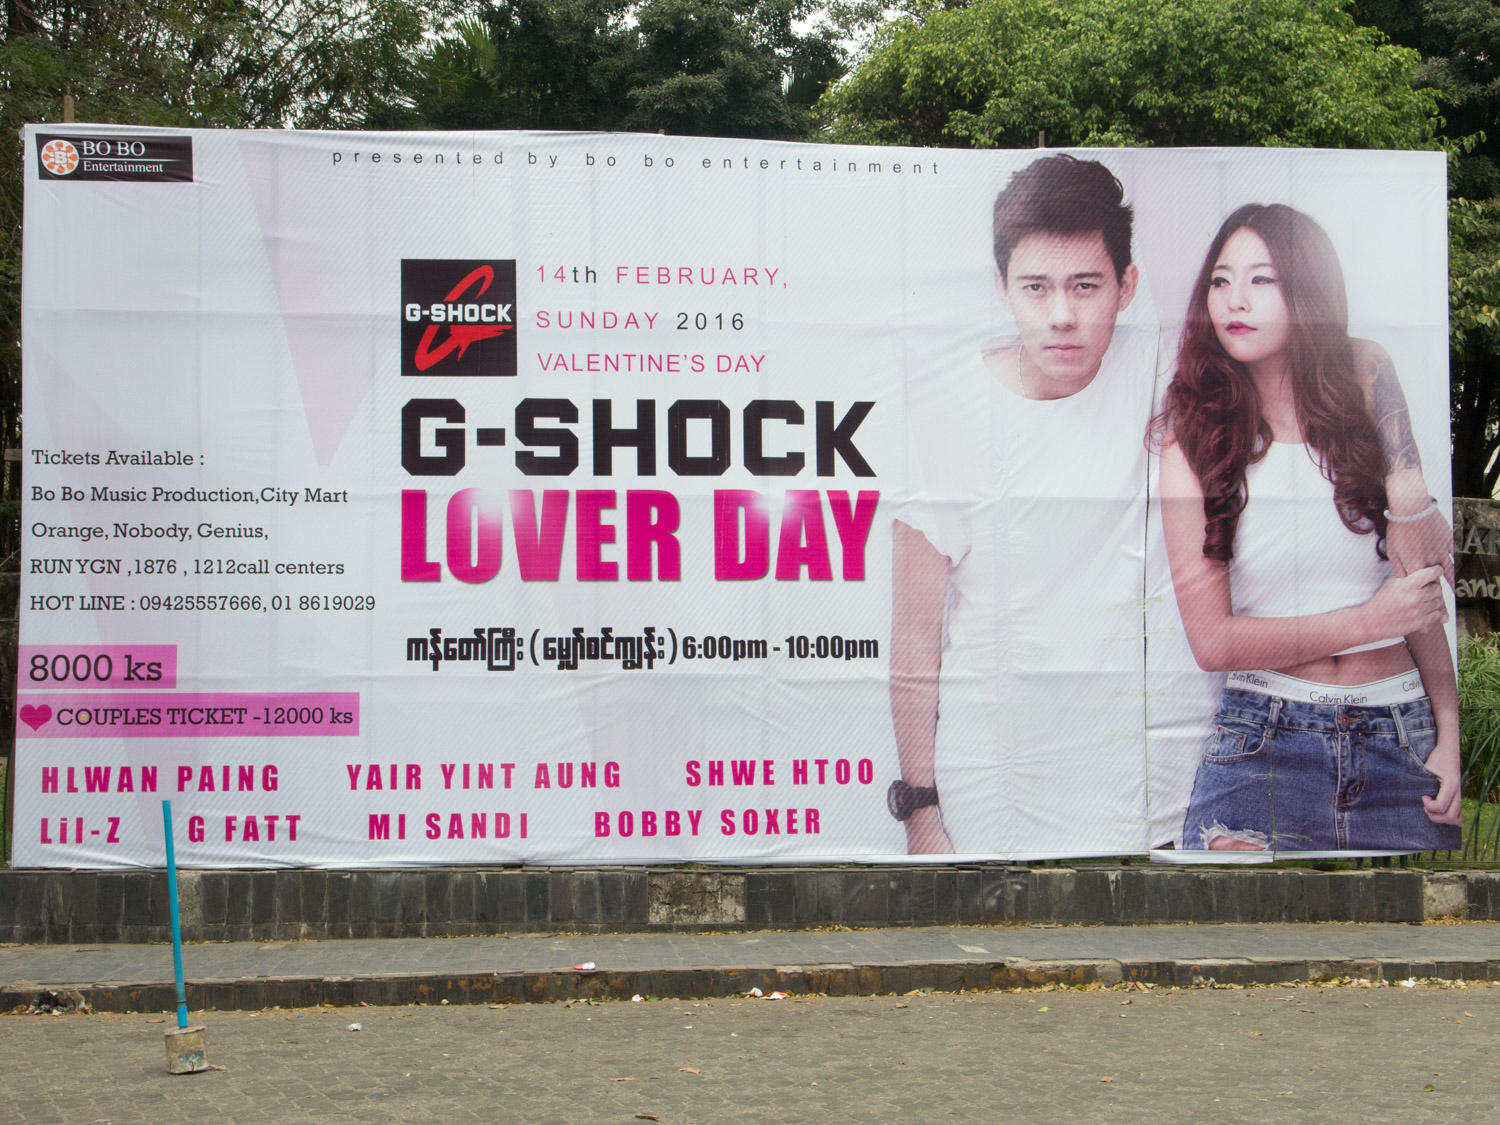 It's unclear whether this is a day for people who love G-Shock, that just happens to be on Valentine's Day, or if G-Shock have rebranded Valentine's Day to "Lover Day".